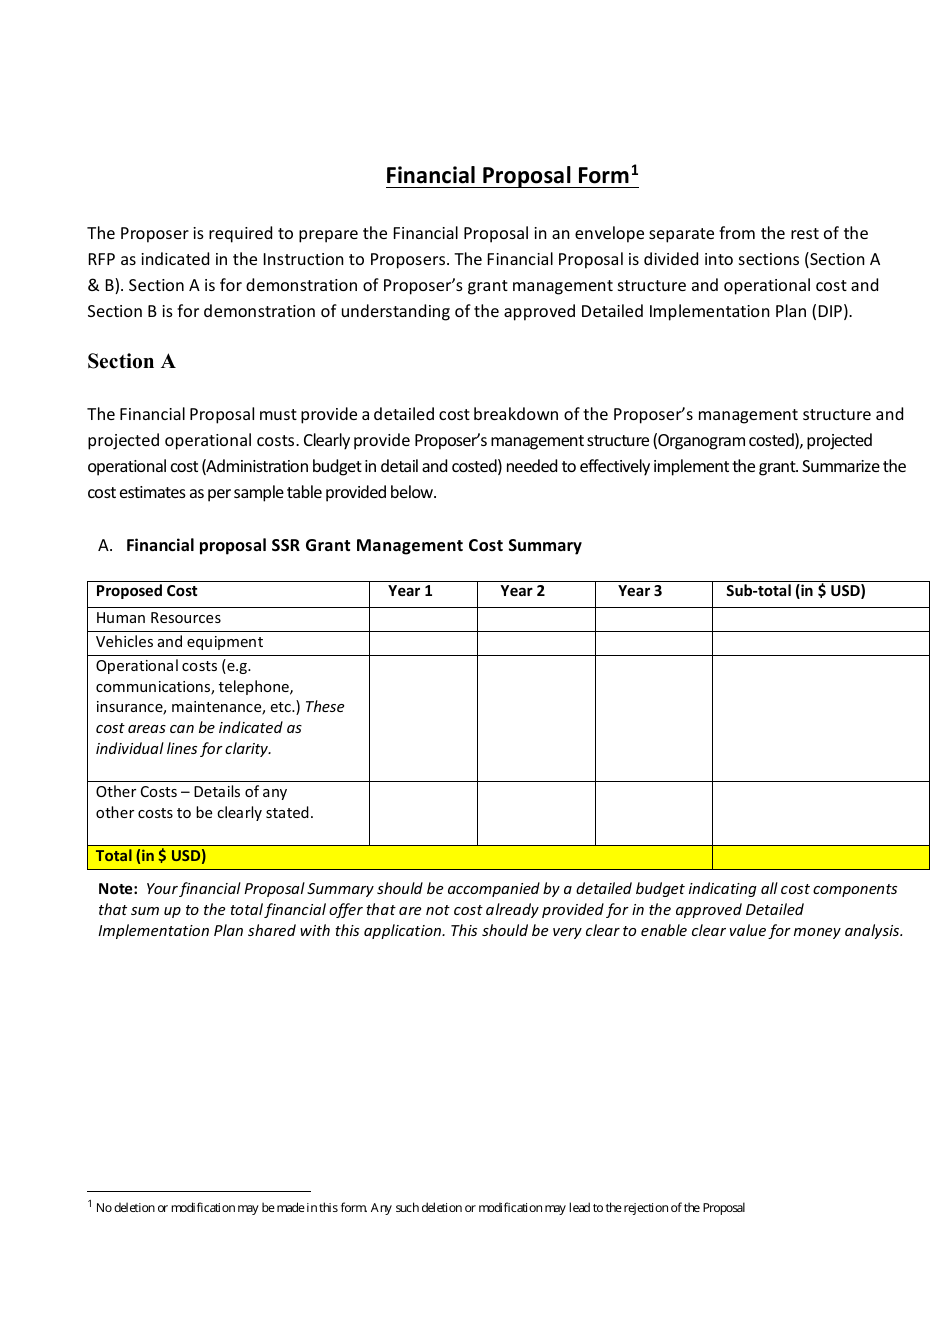 Financial Proposal Form, Page 1